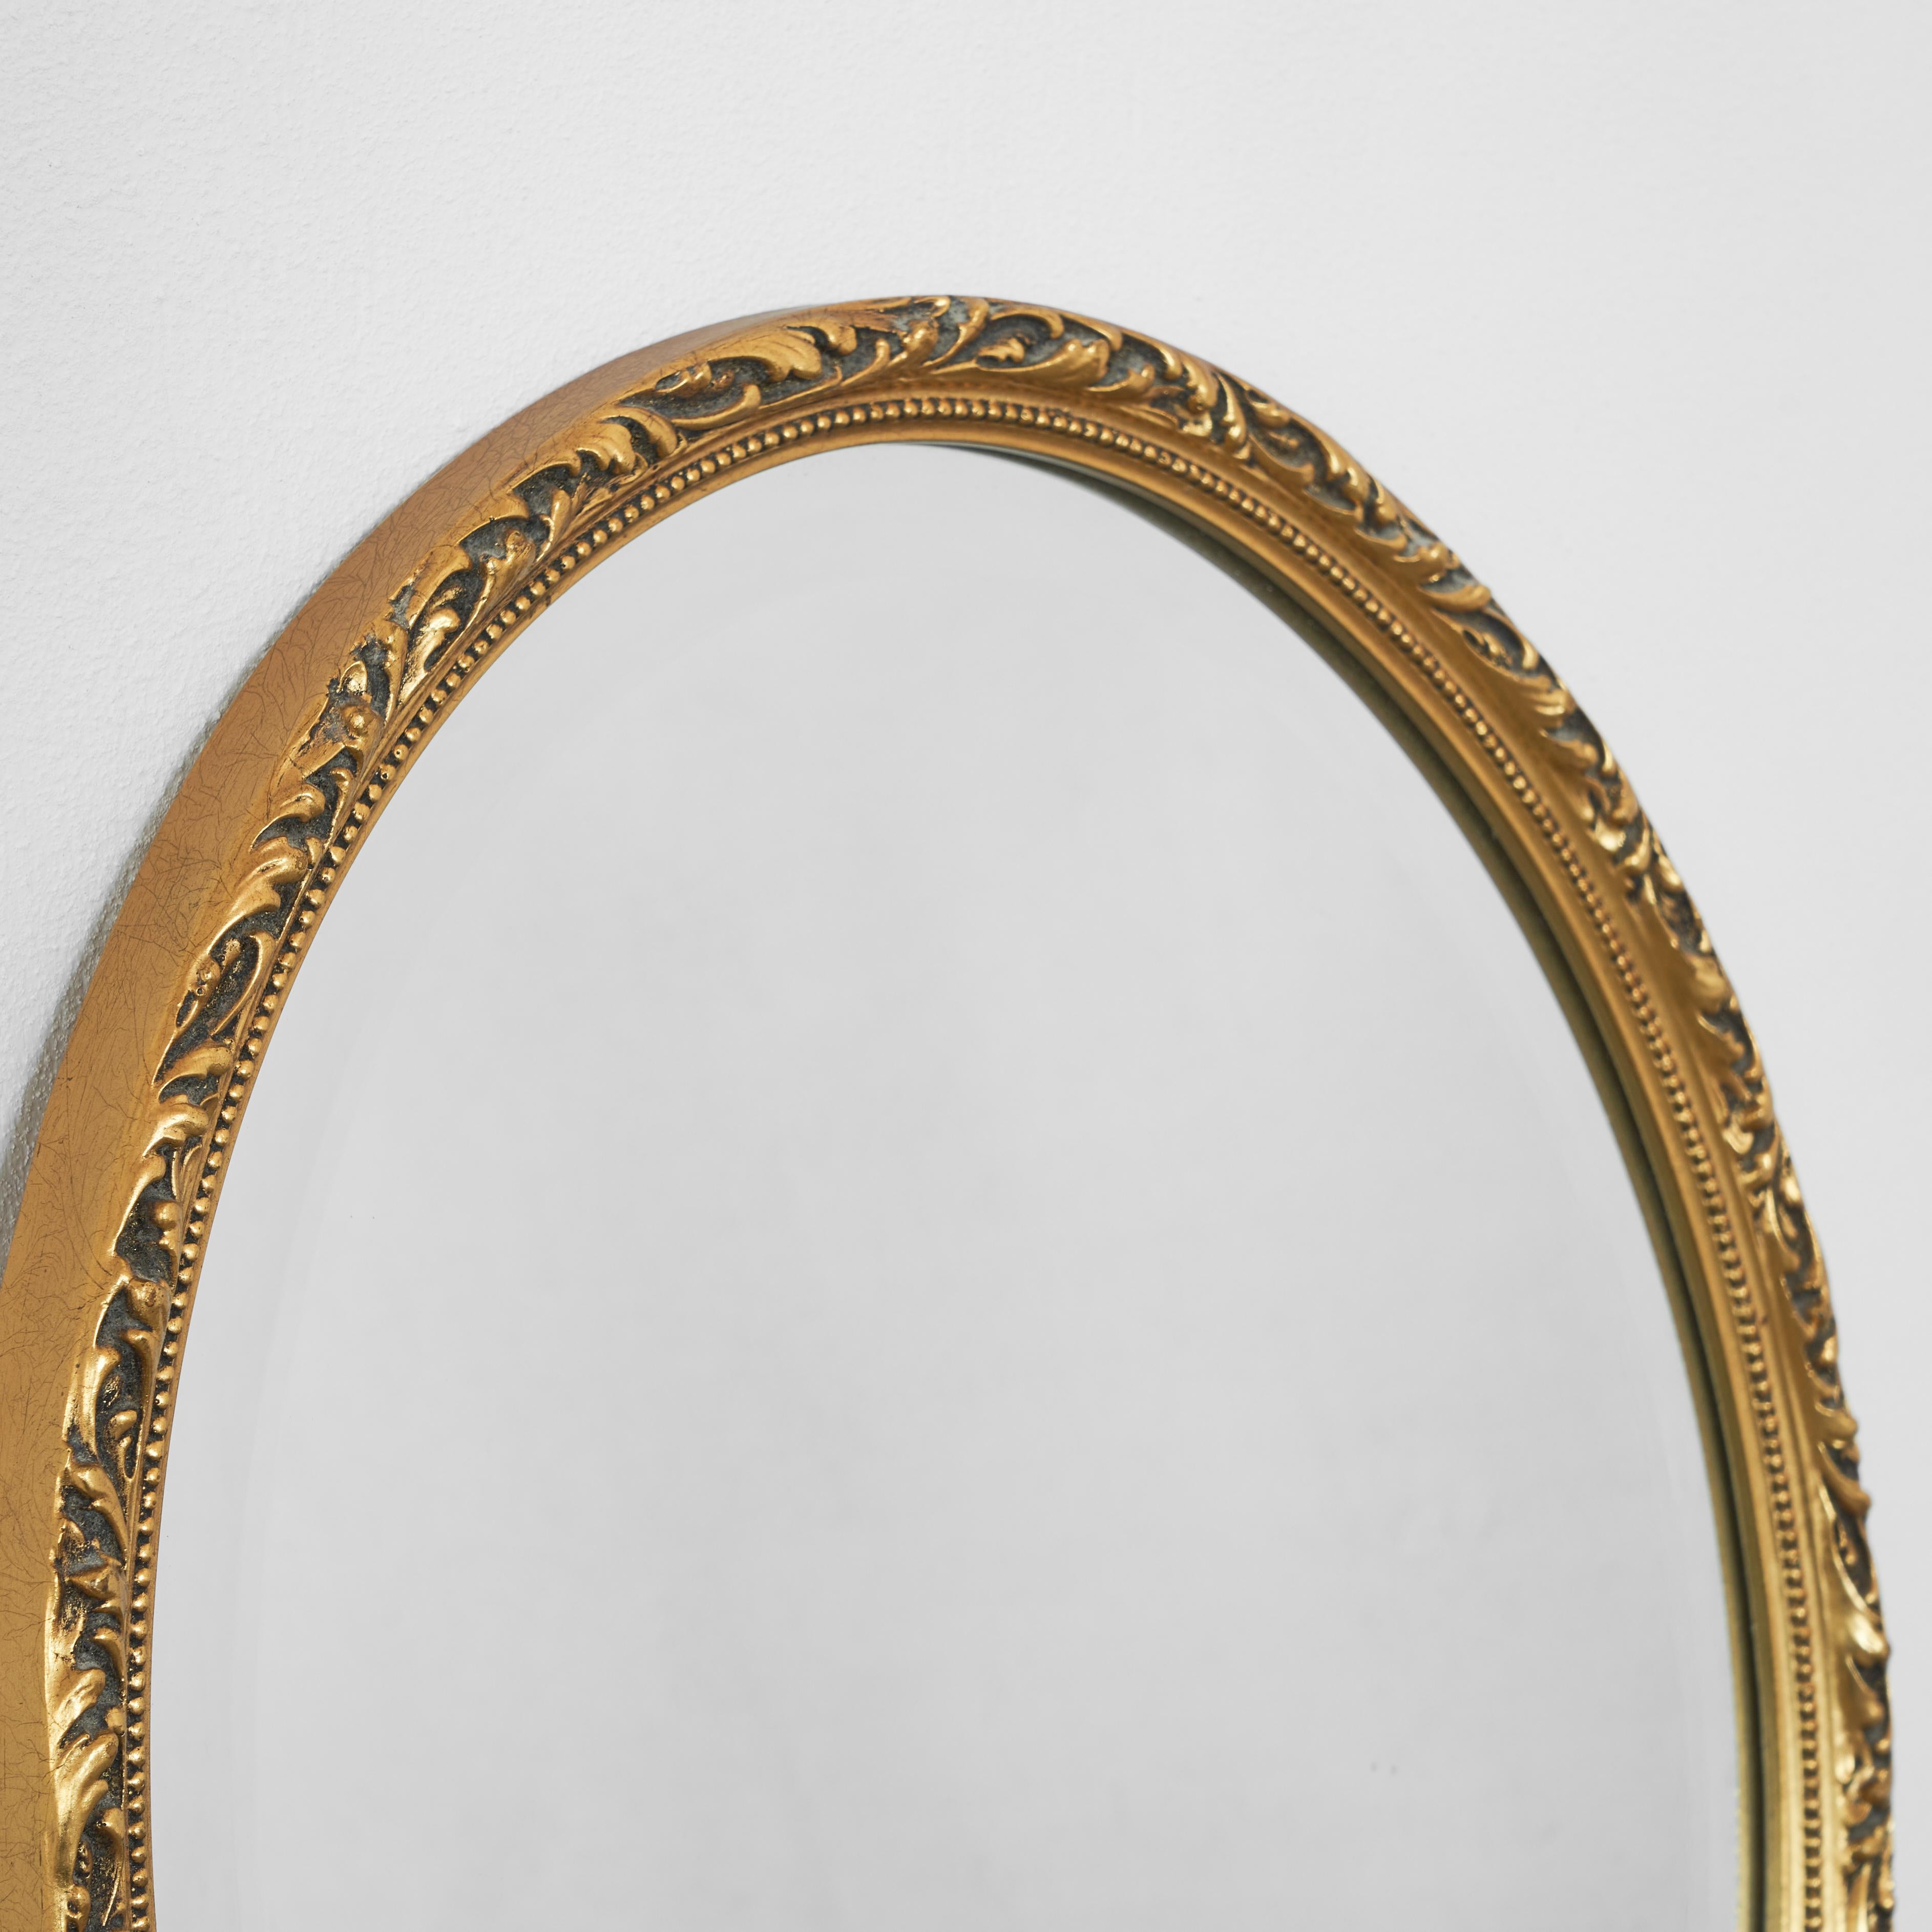 Neoclassical Oval Mirror in Gold Painted Wood 1960s For Sale